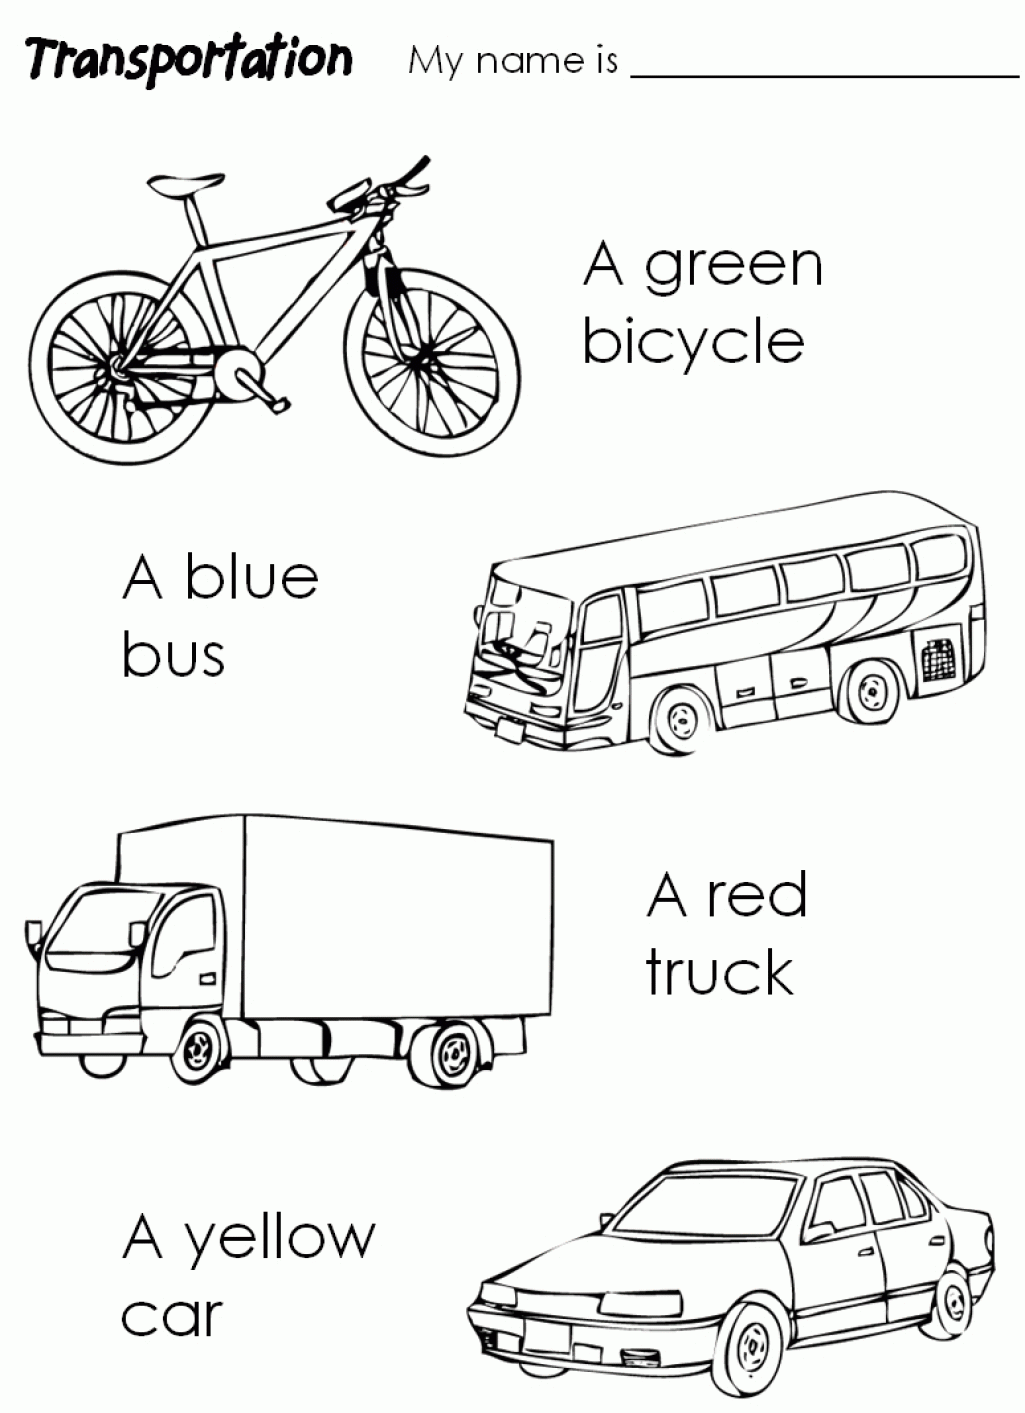 647 Simple Free Printable Transportation Coloring Pages with Animal character